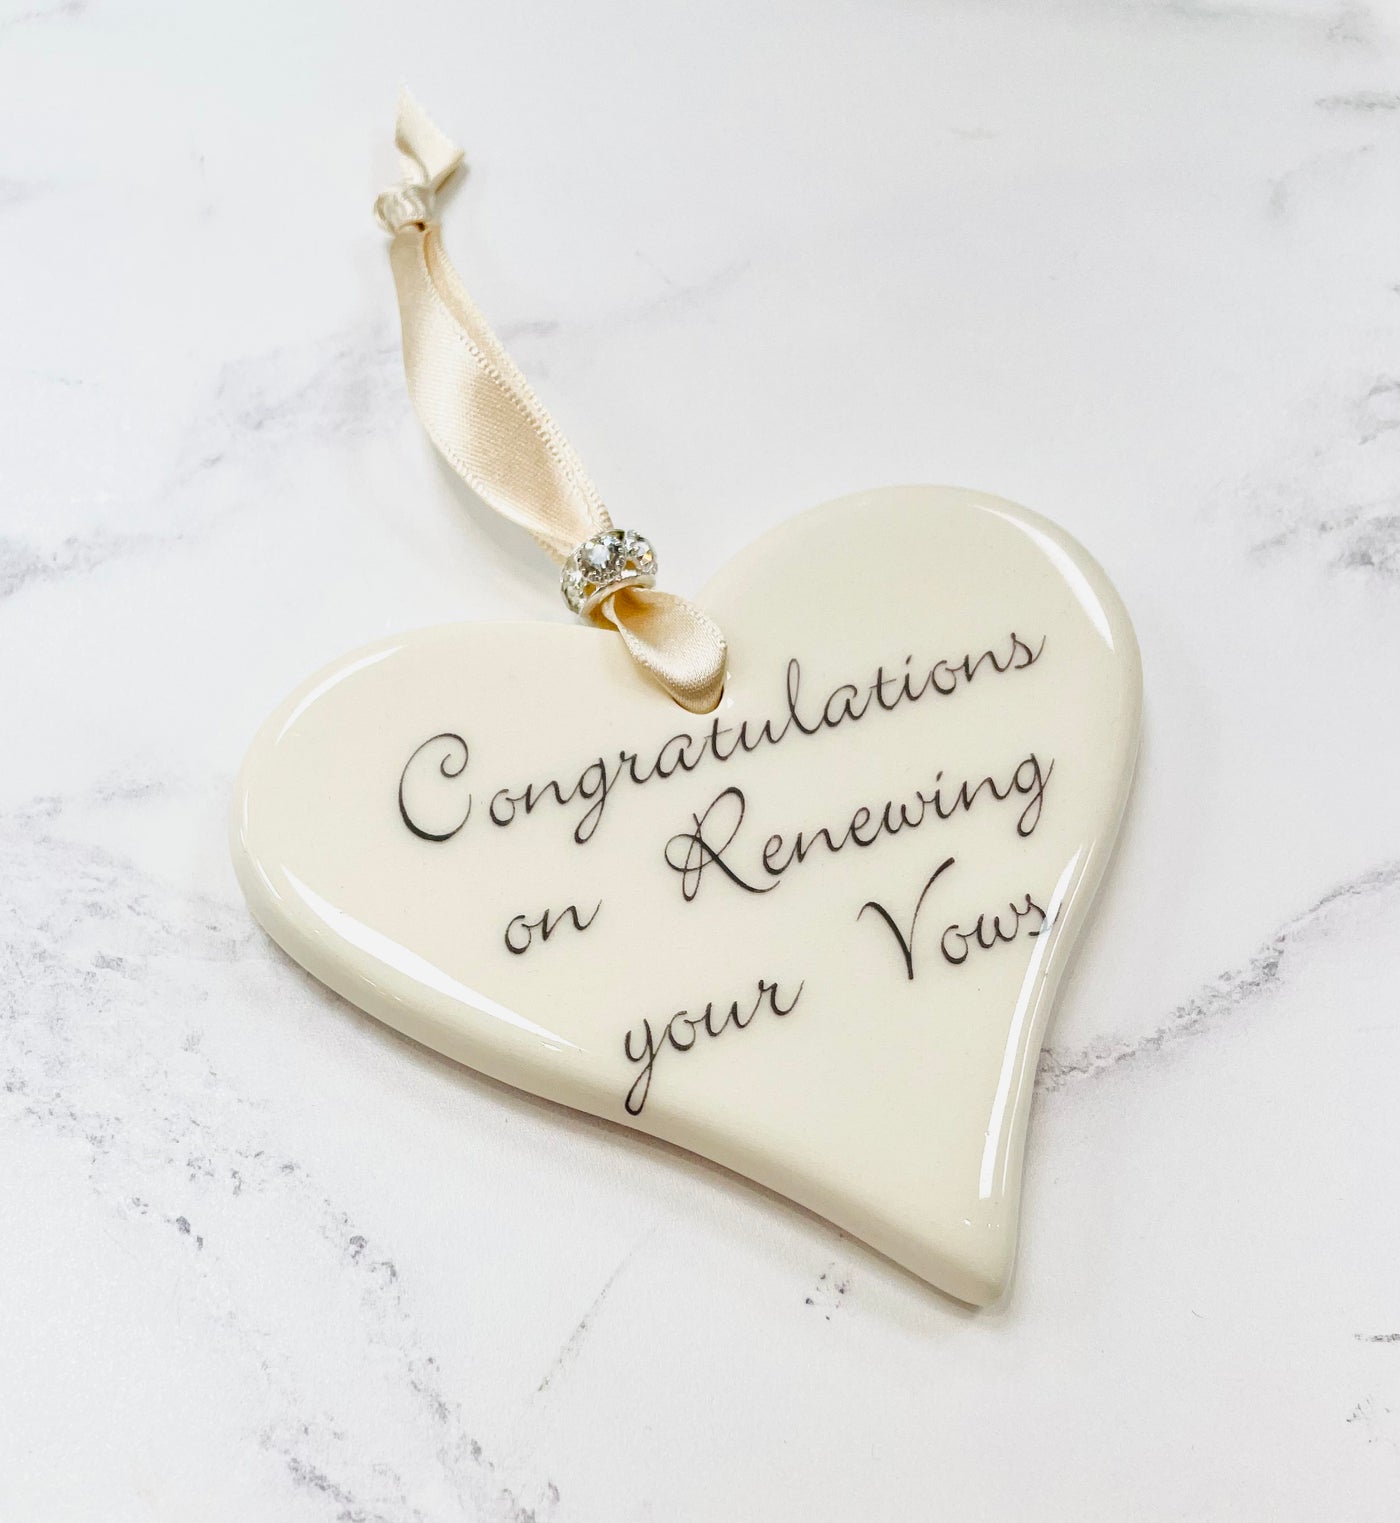 Dimbleby Ceramics LARGE Sentiment Hanging Heart - Congratulations on Renewing Your Vows